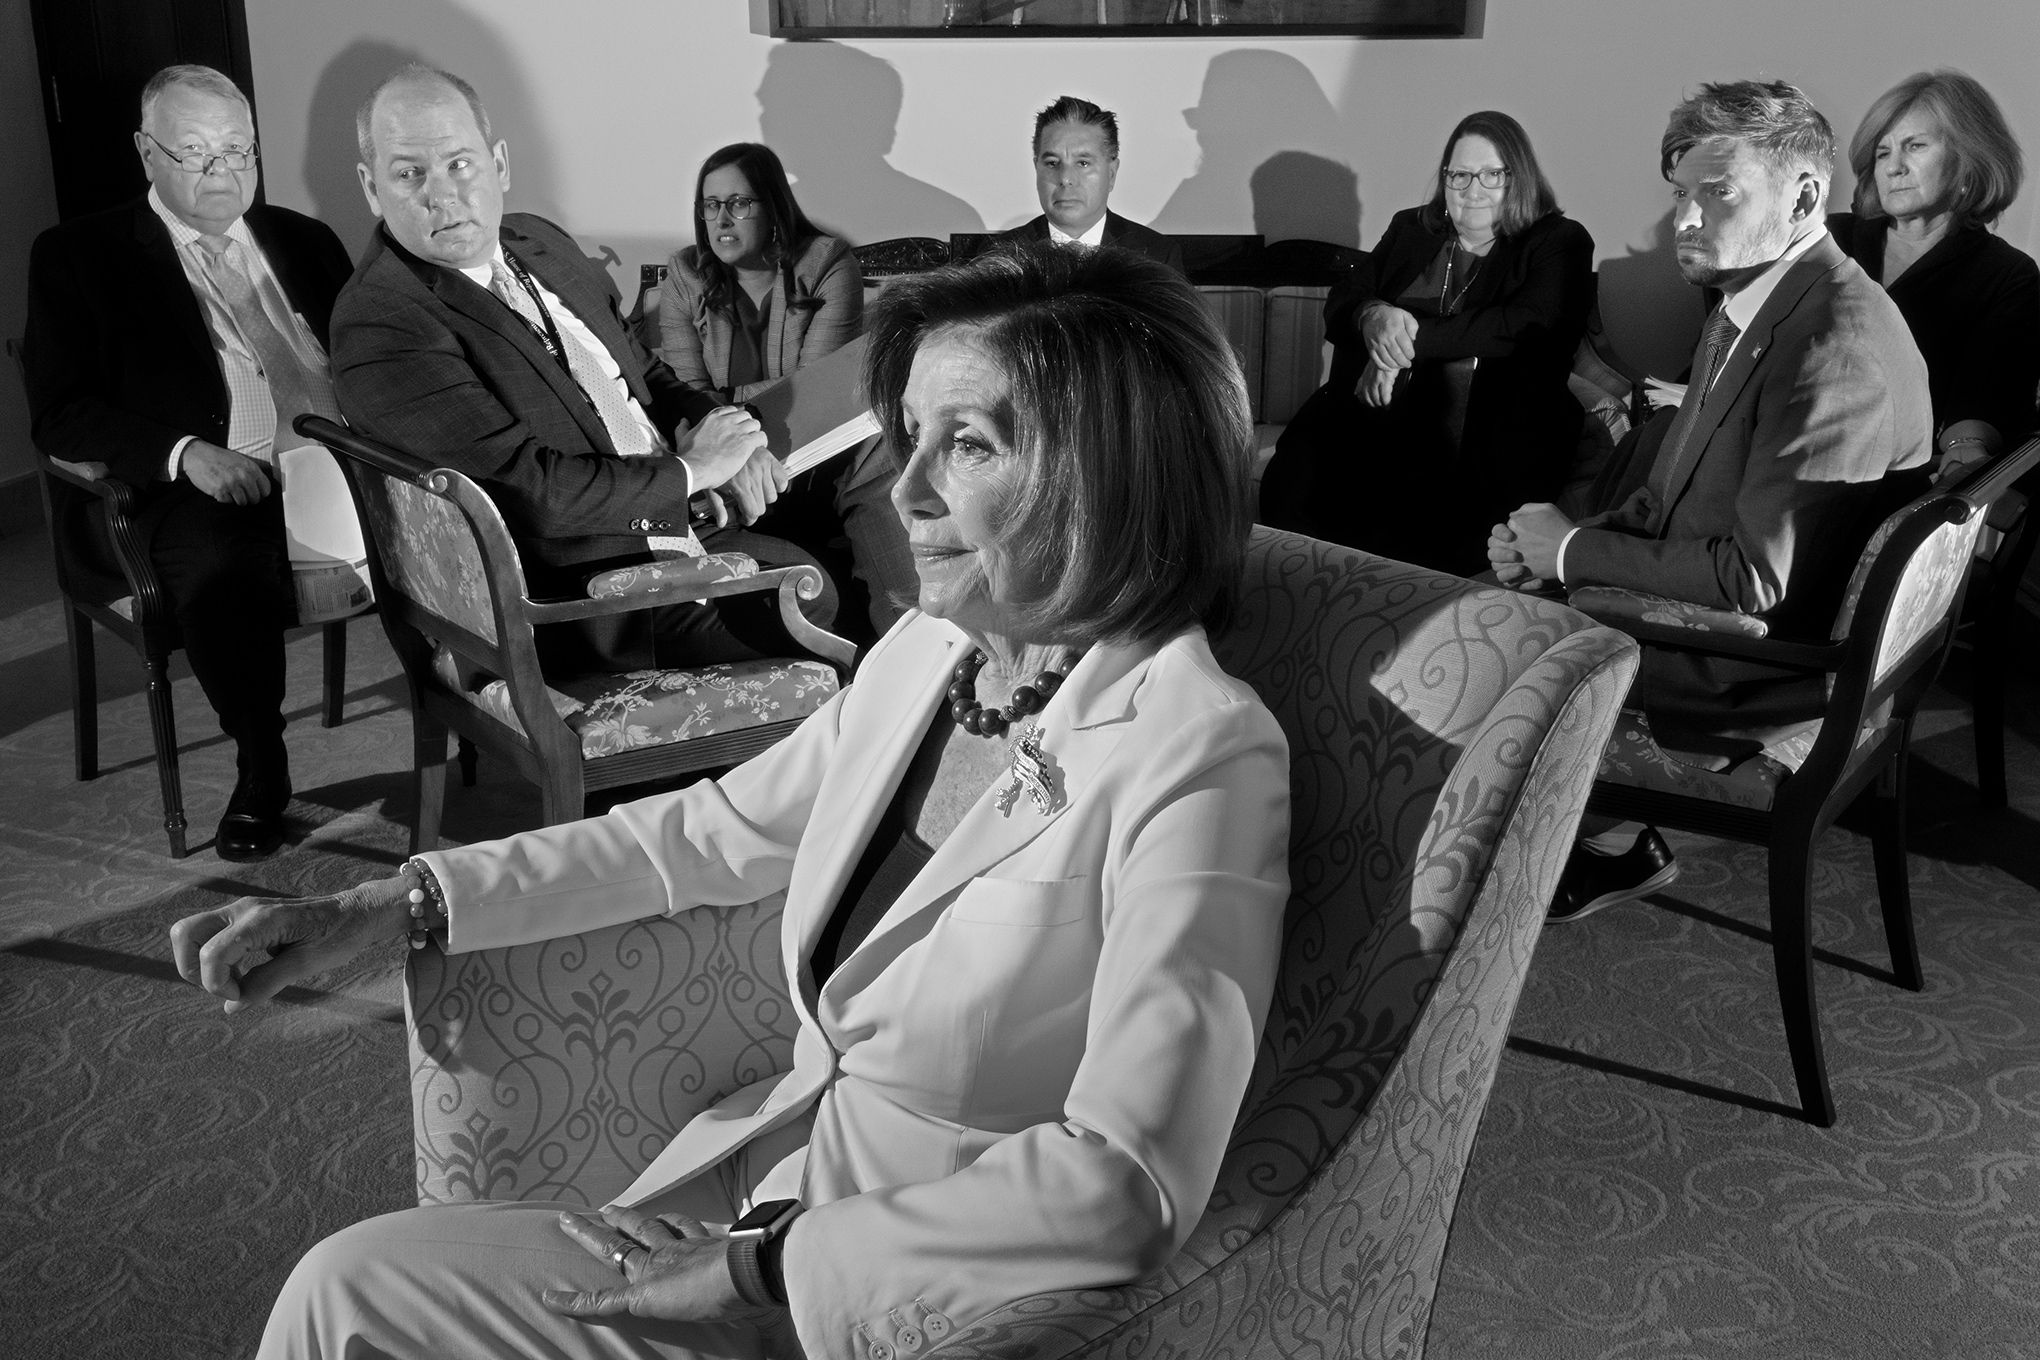 Pelosi meets with her staff on Capitol Hill on December 5. (Philip Montgomery for TIME)